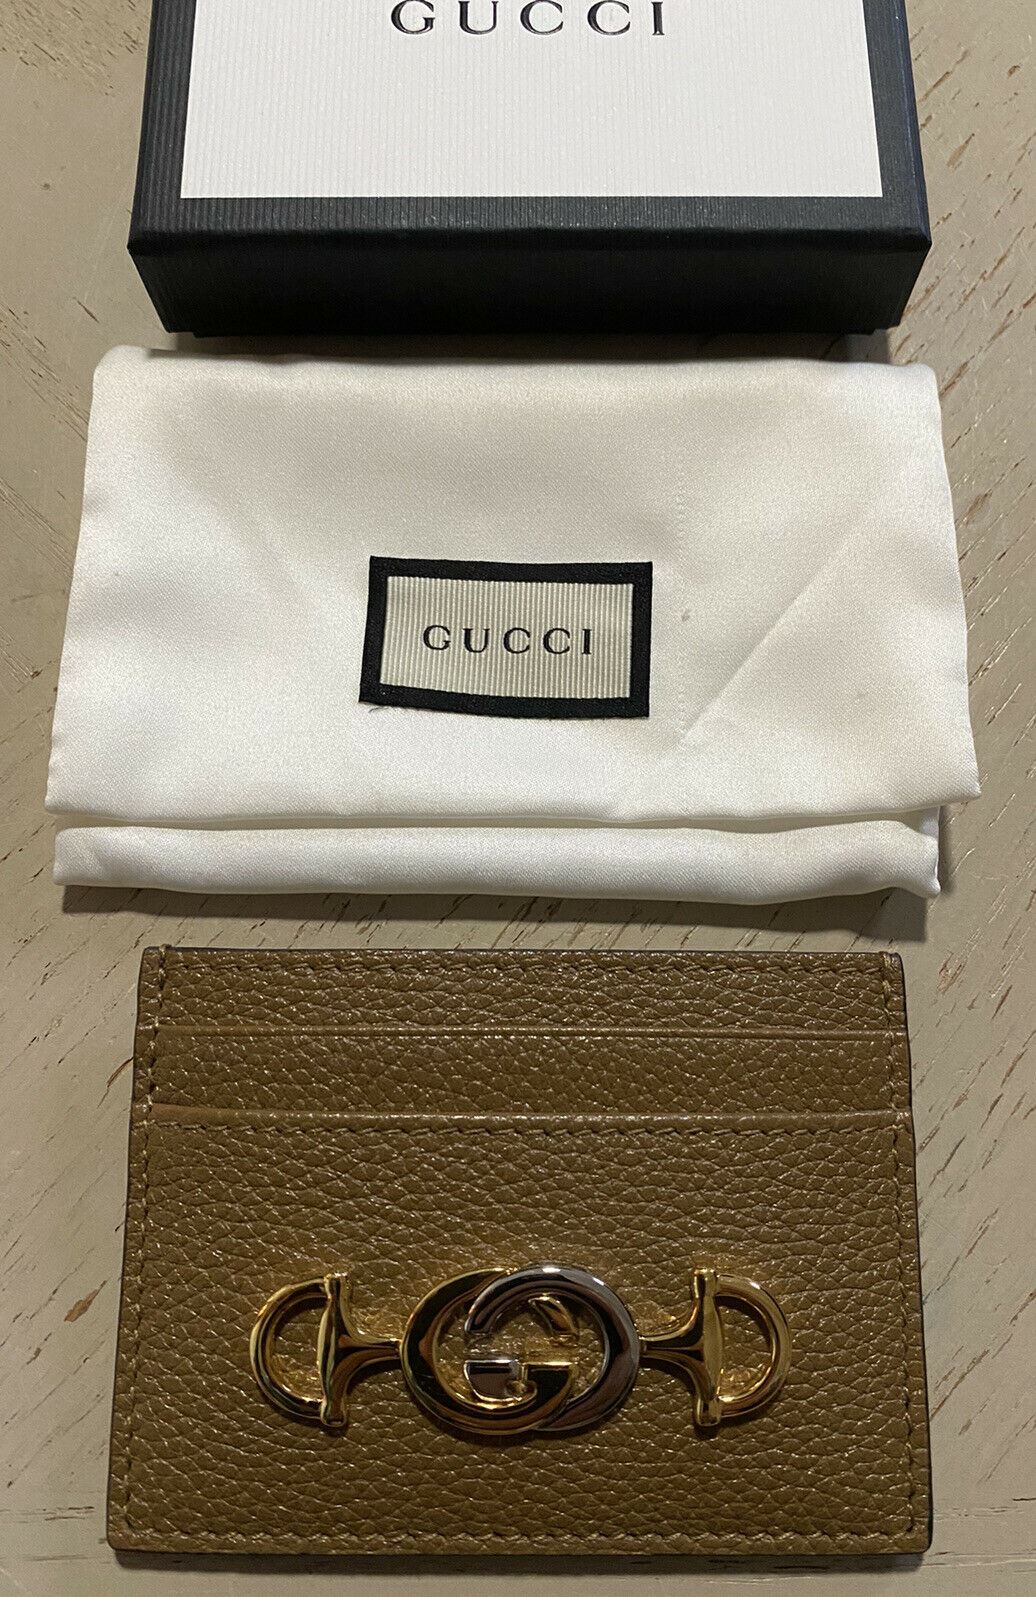 New Gucci Men’s Small Wallet Cart Holder GG Monogram Brown Italy